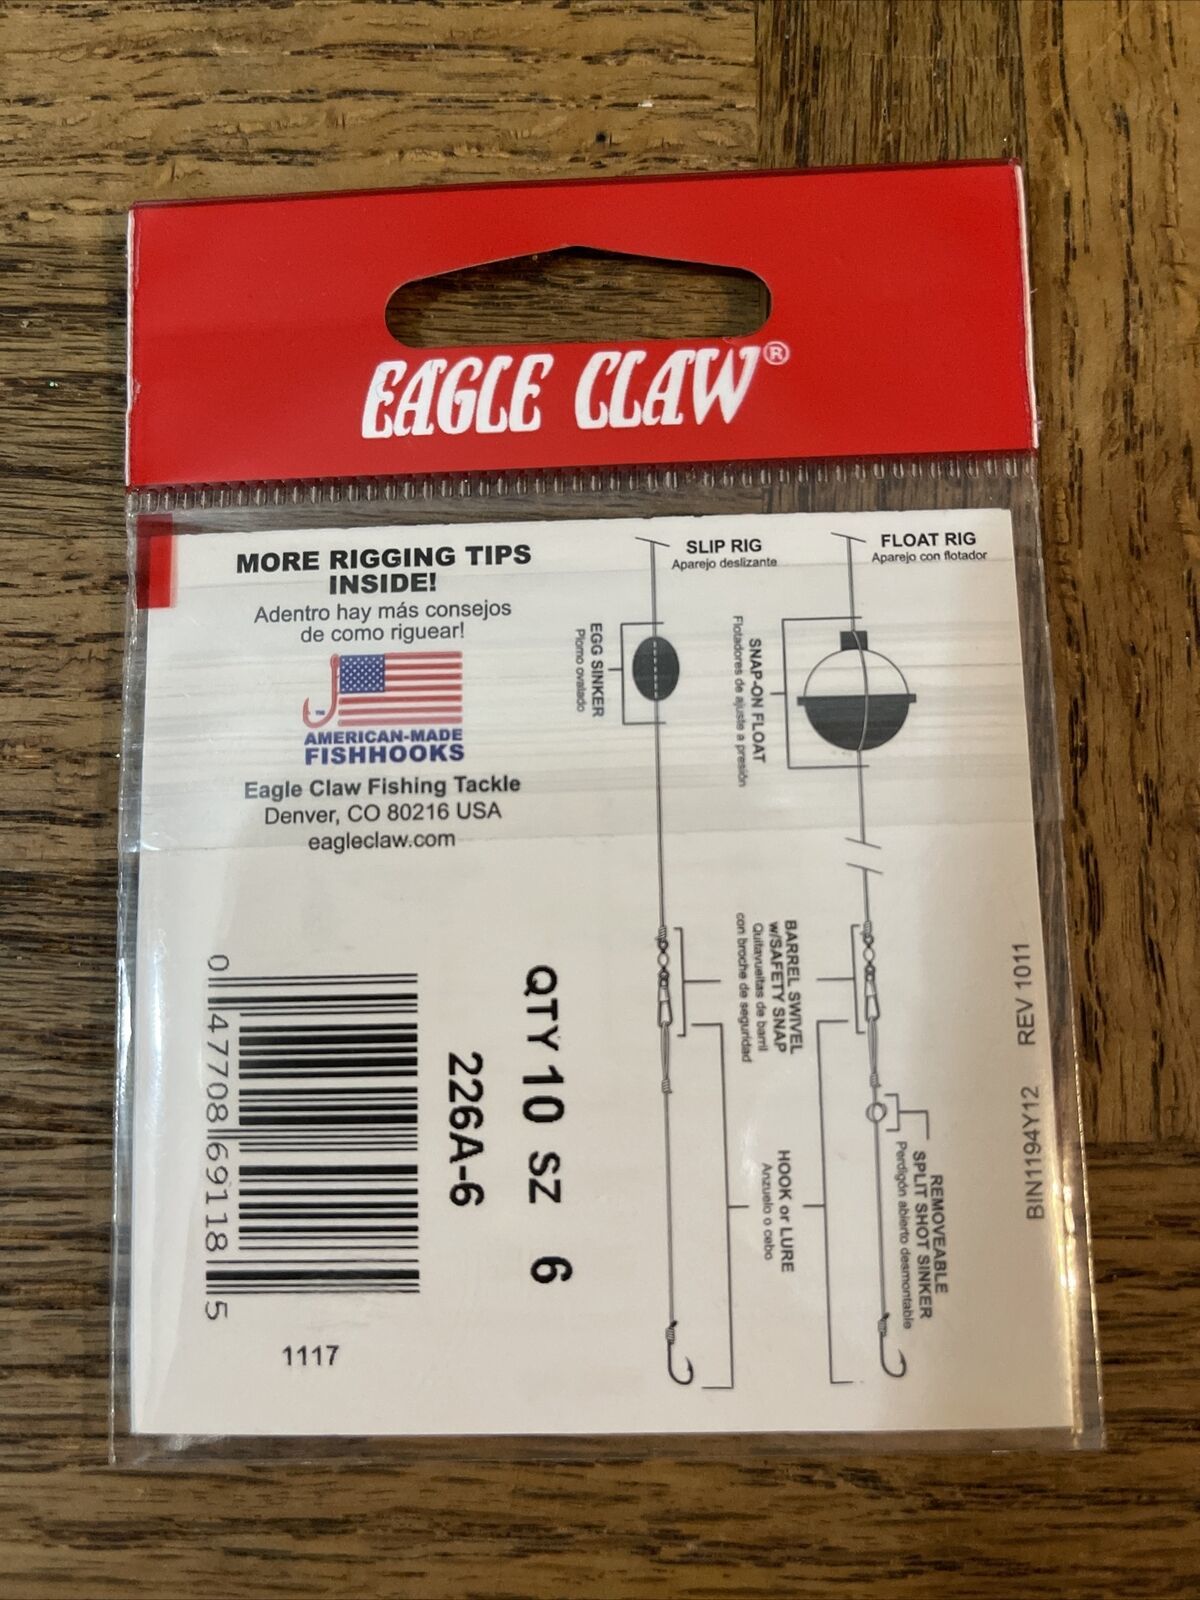 Eagle claw Octopus Hook 226a-6 and similar items